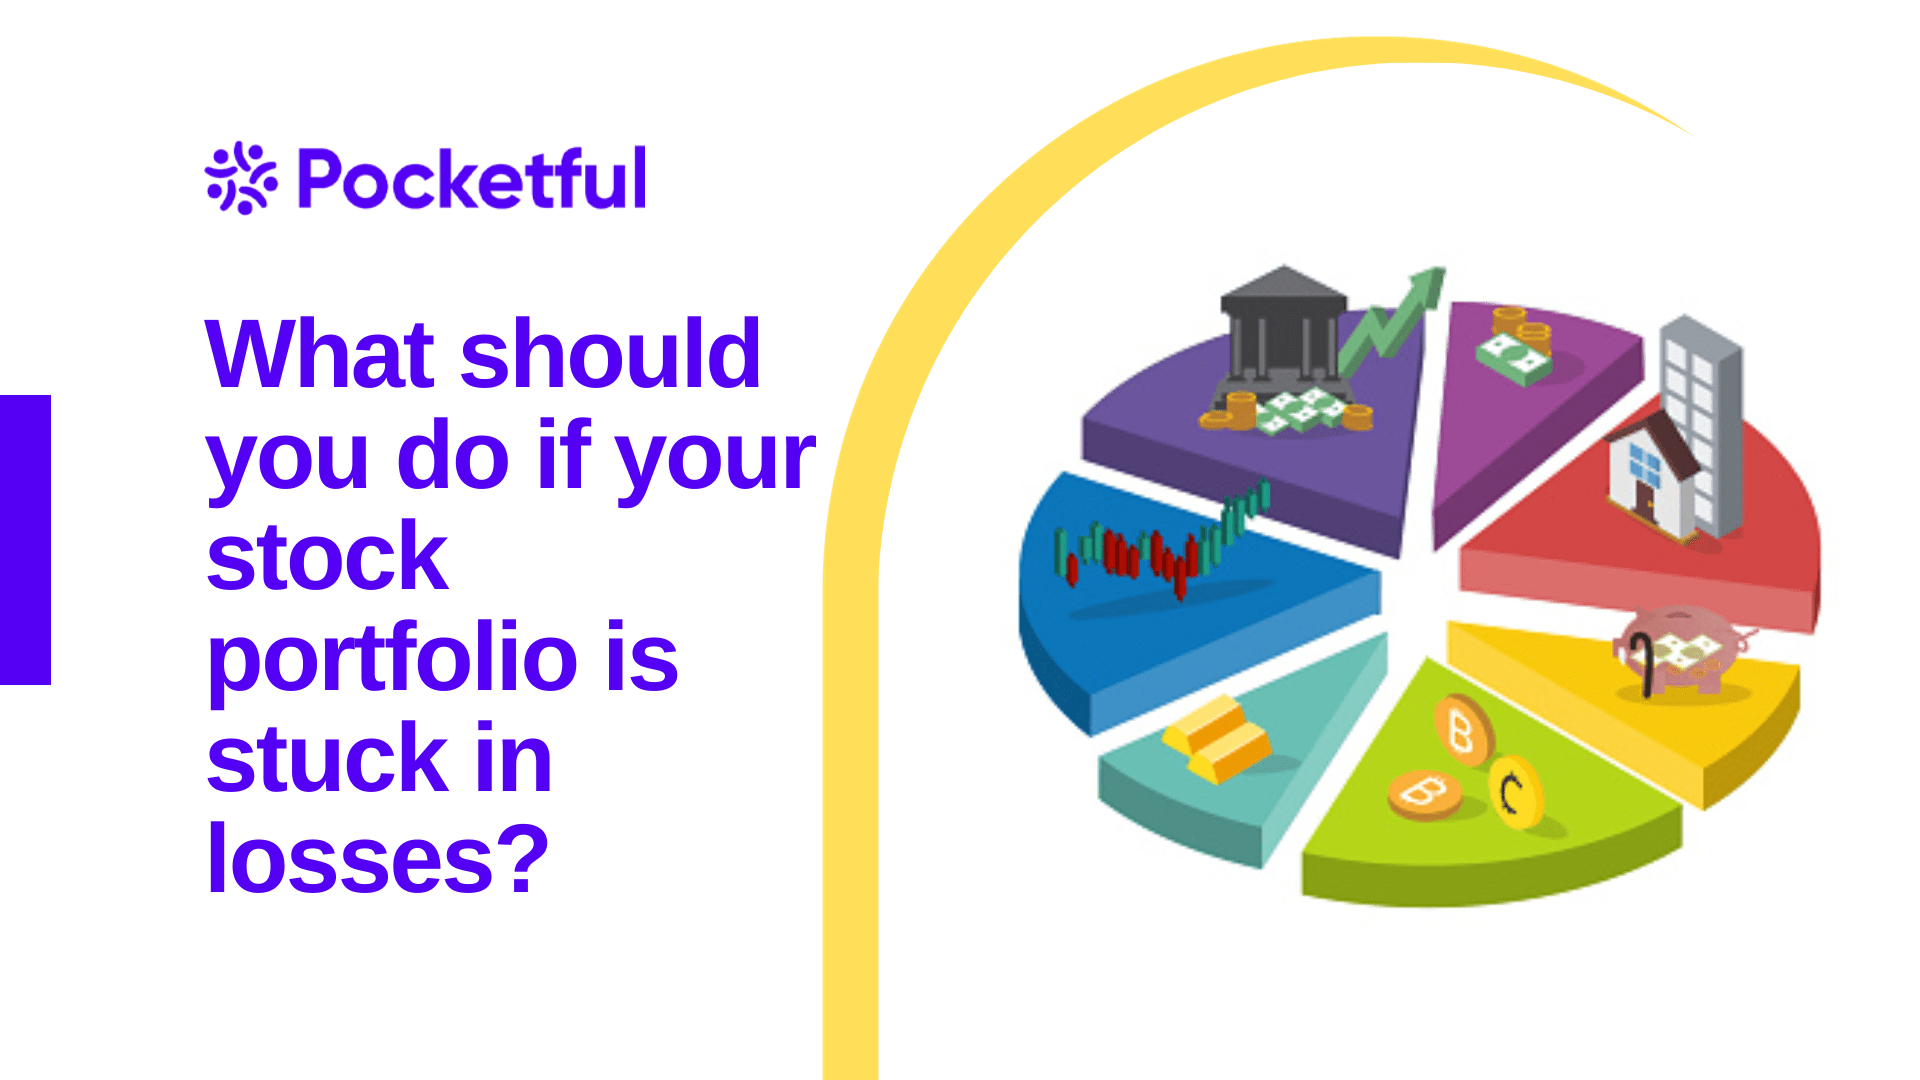 What should you do if your stock portfolio is stuck in losses?